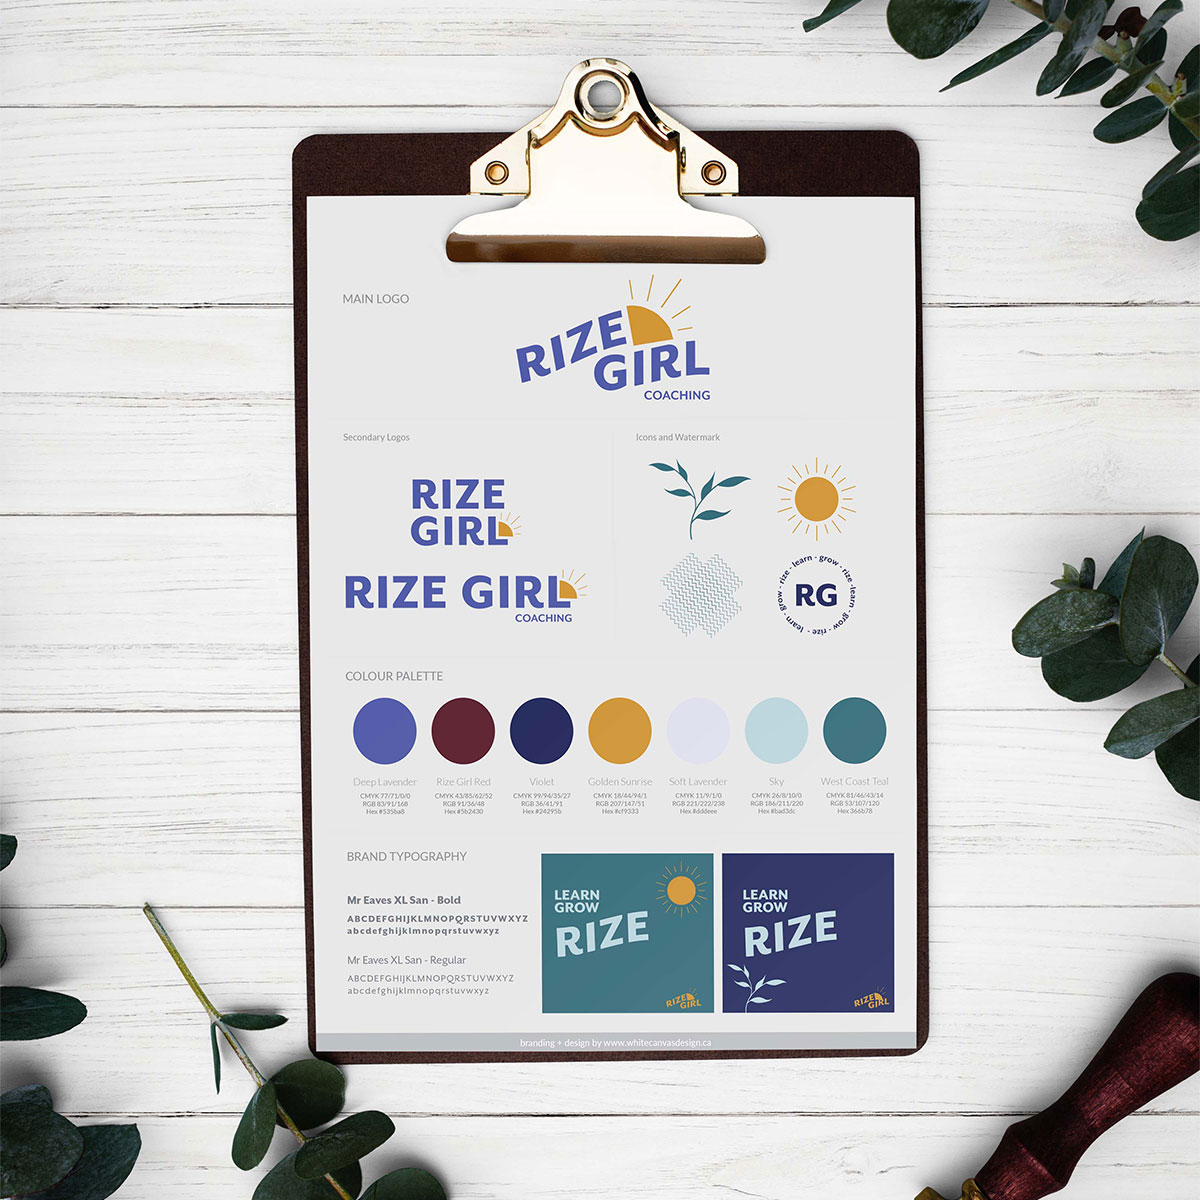 Rize Girl stylesheet showing the logos, colour palette, watermarks and typography – by White Canvas Design